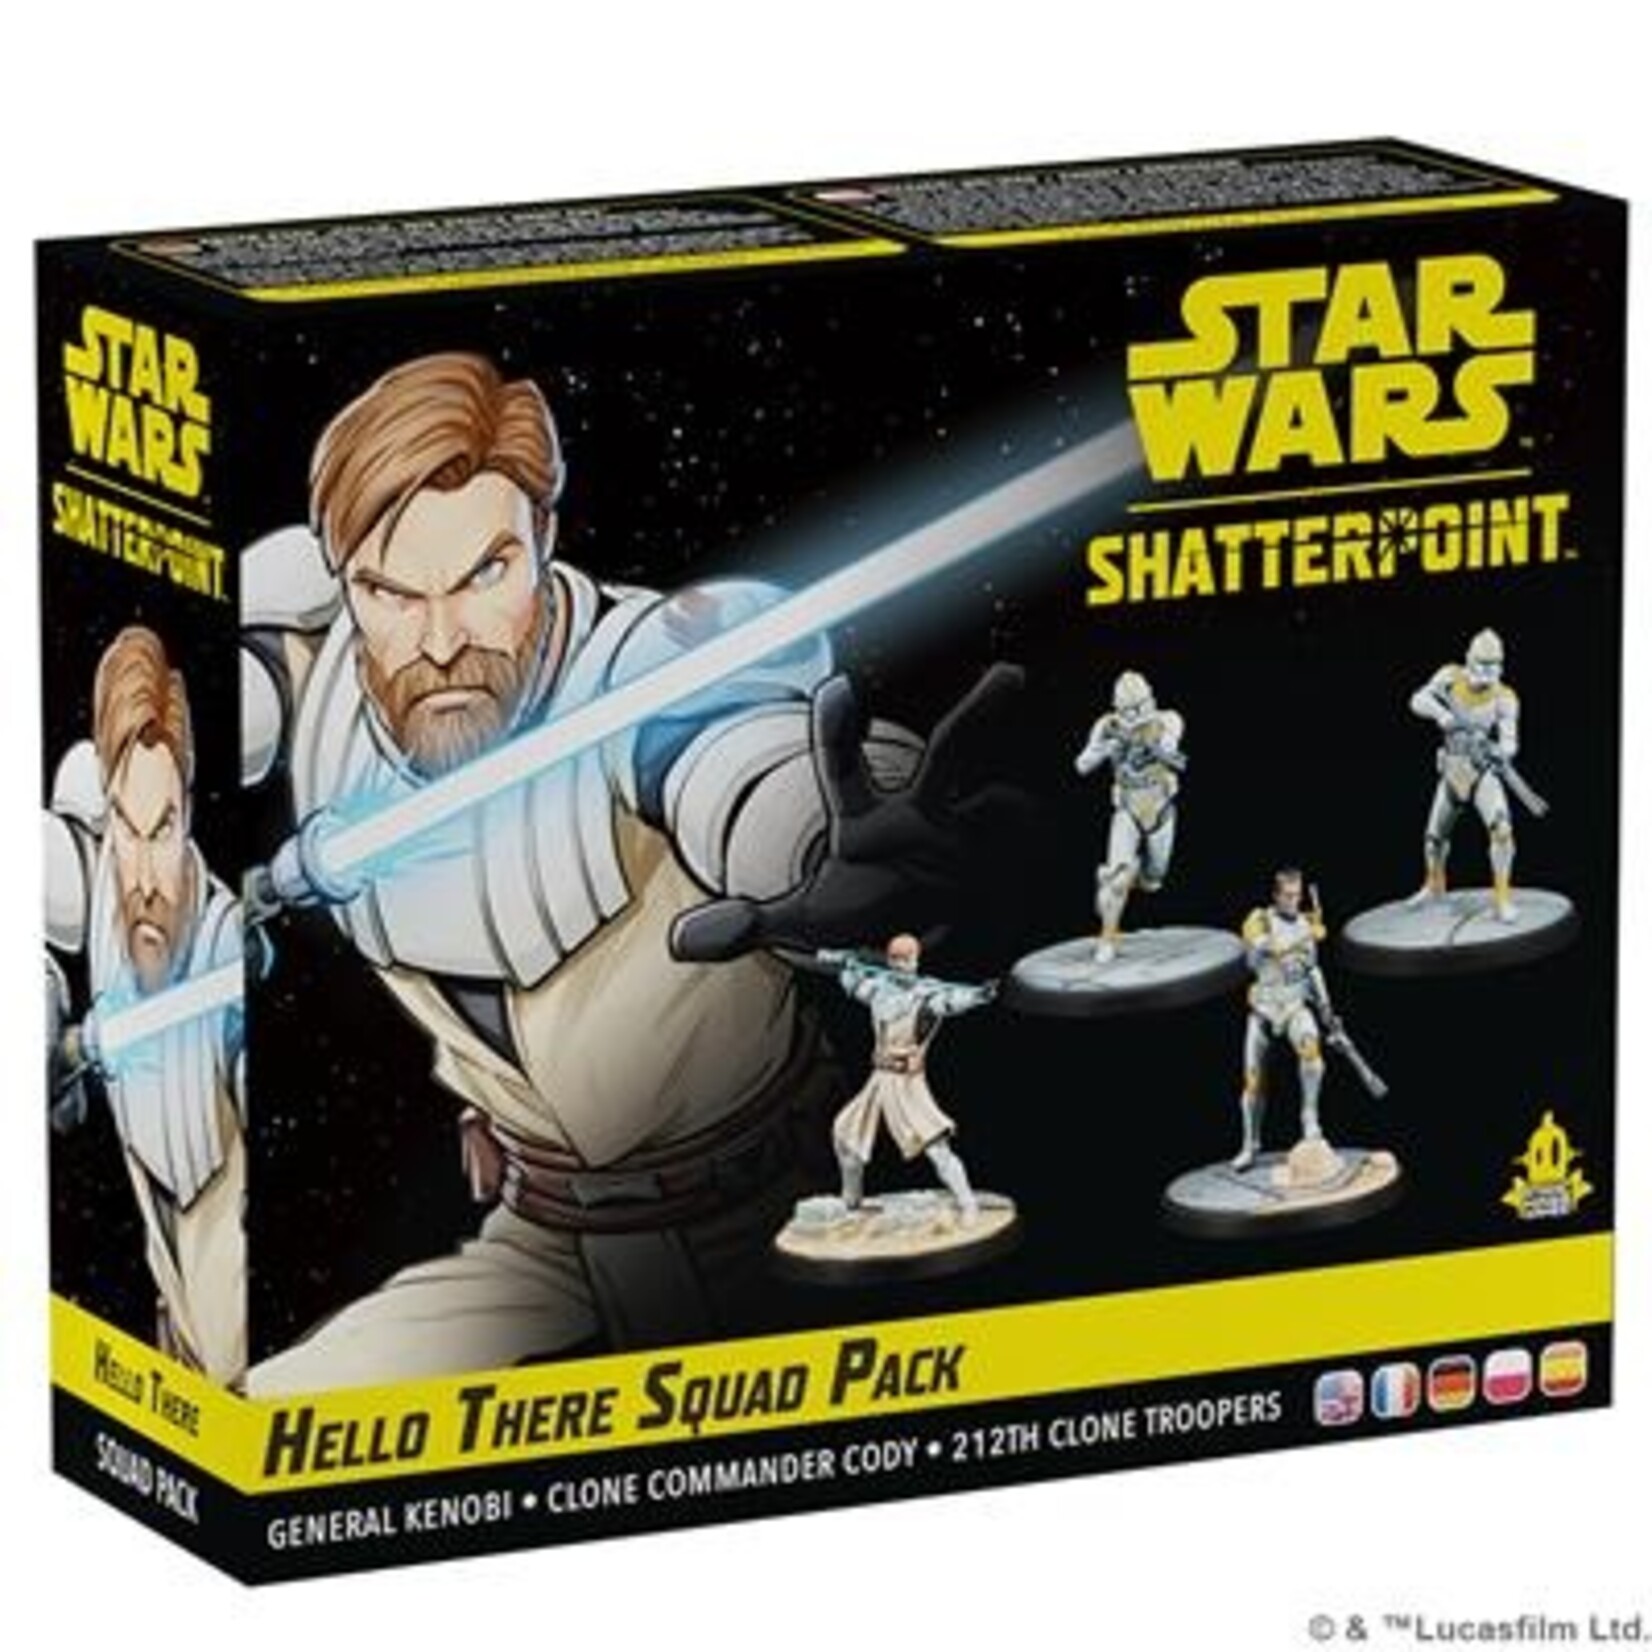 AMG Star Wars: Shatterpoint Hello There- General Obi-Wan Kenobi Squad Pack